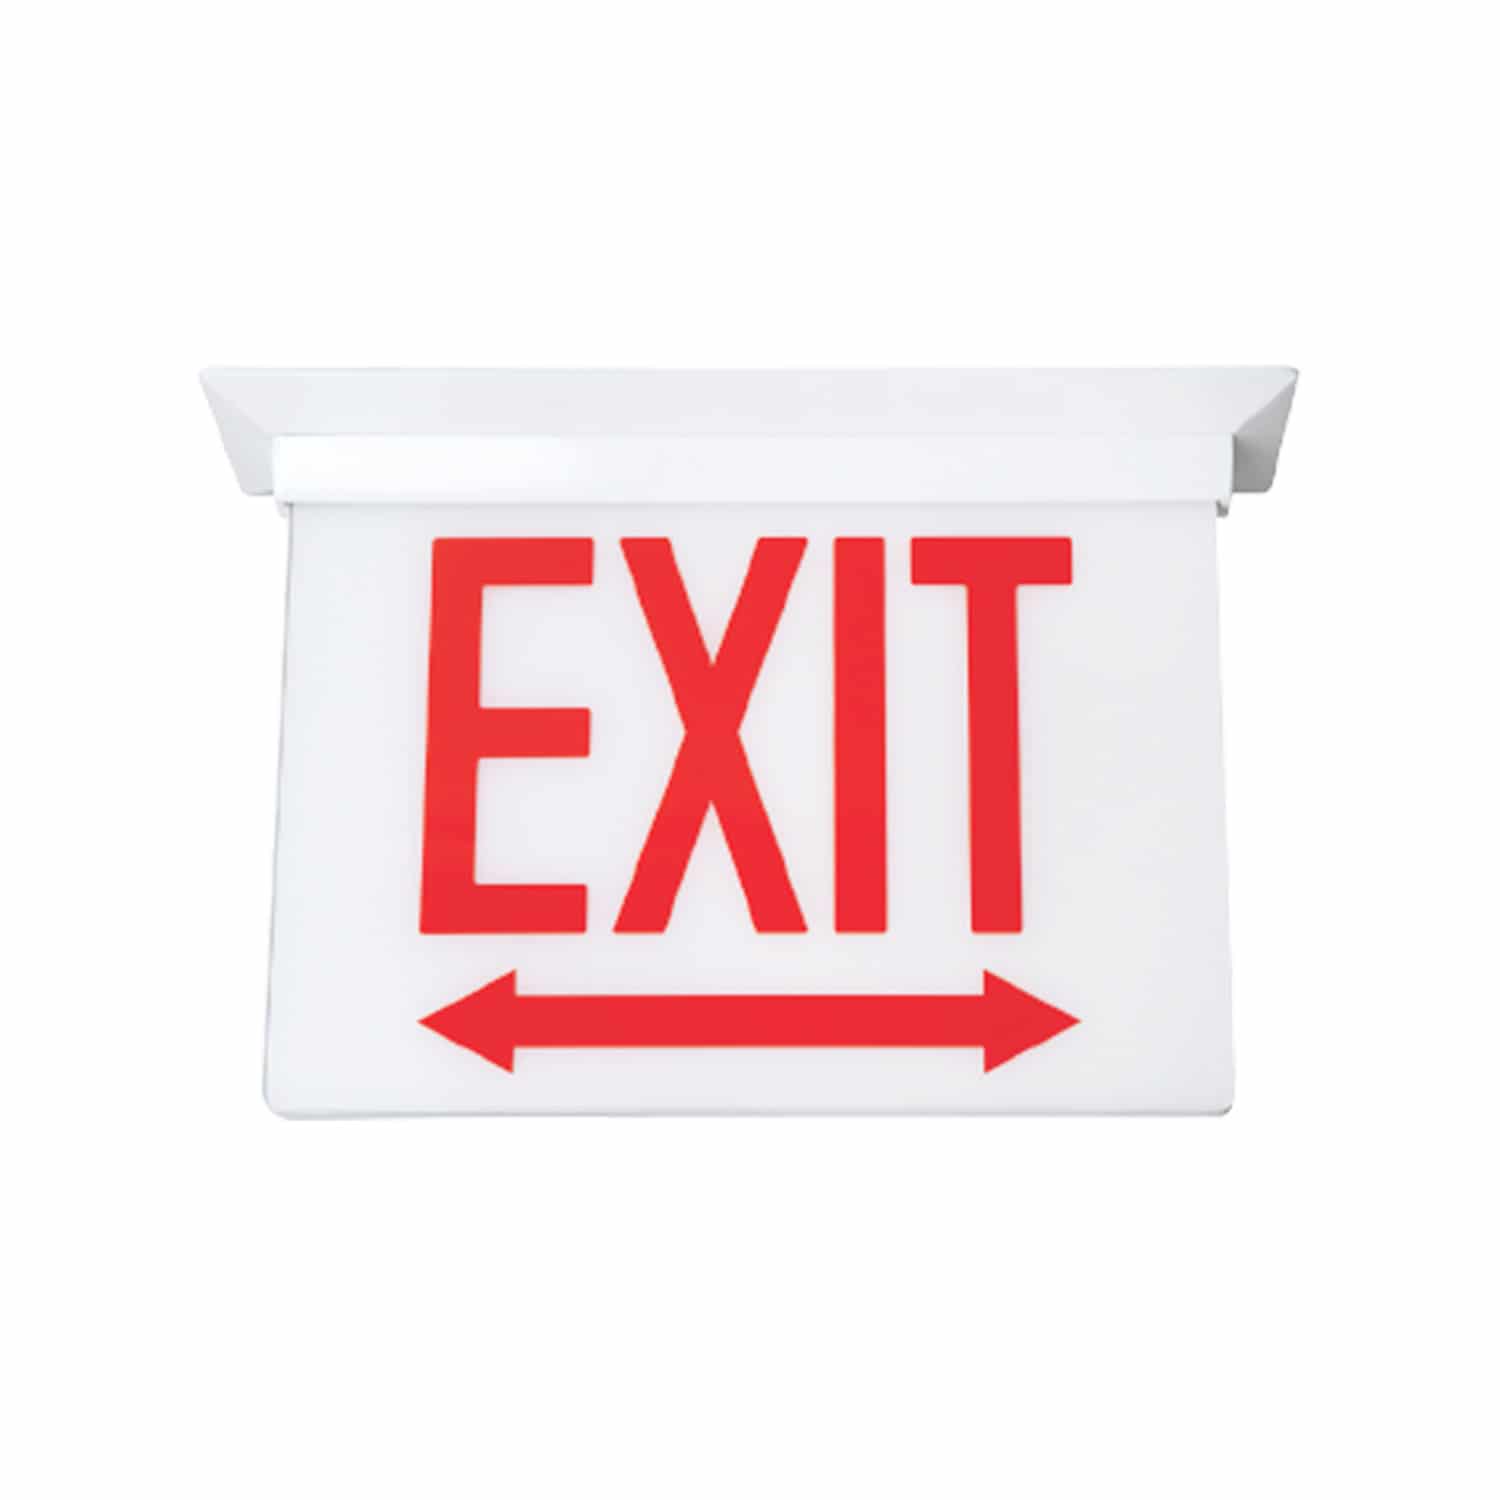 Chicago Approved, LED Edge-Lit Exit Sign with a plenum rated recessed back box. The Isolite PG.